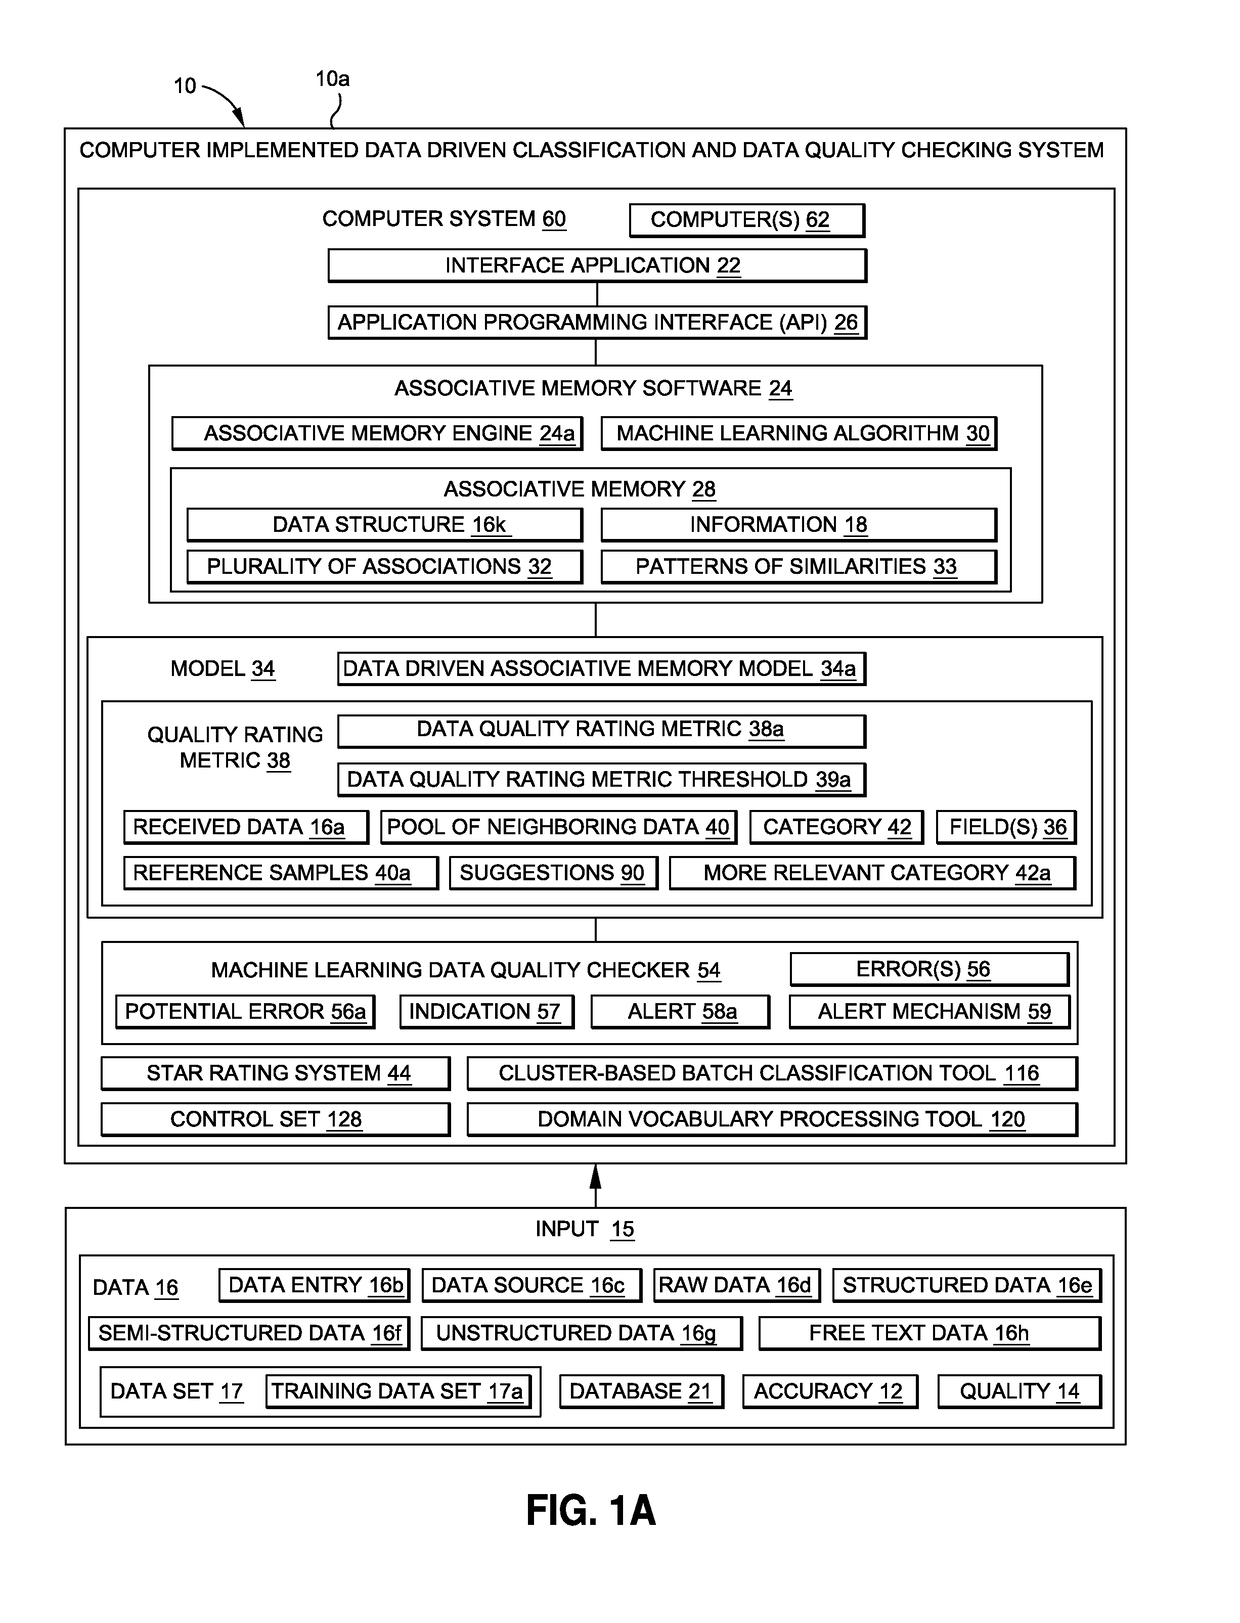 Data driven classification and data quality checking method